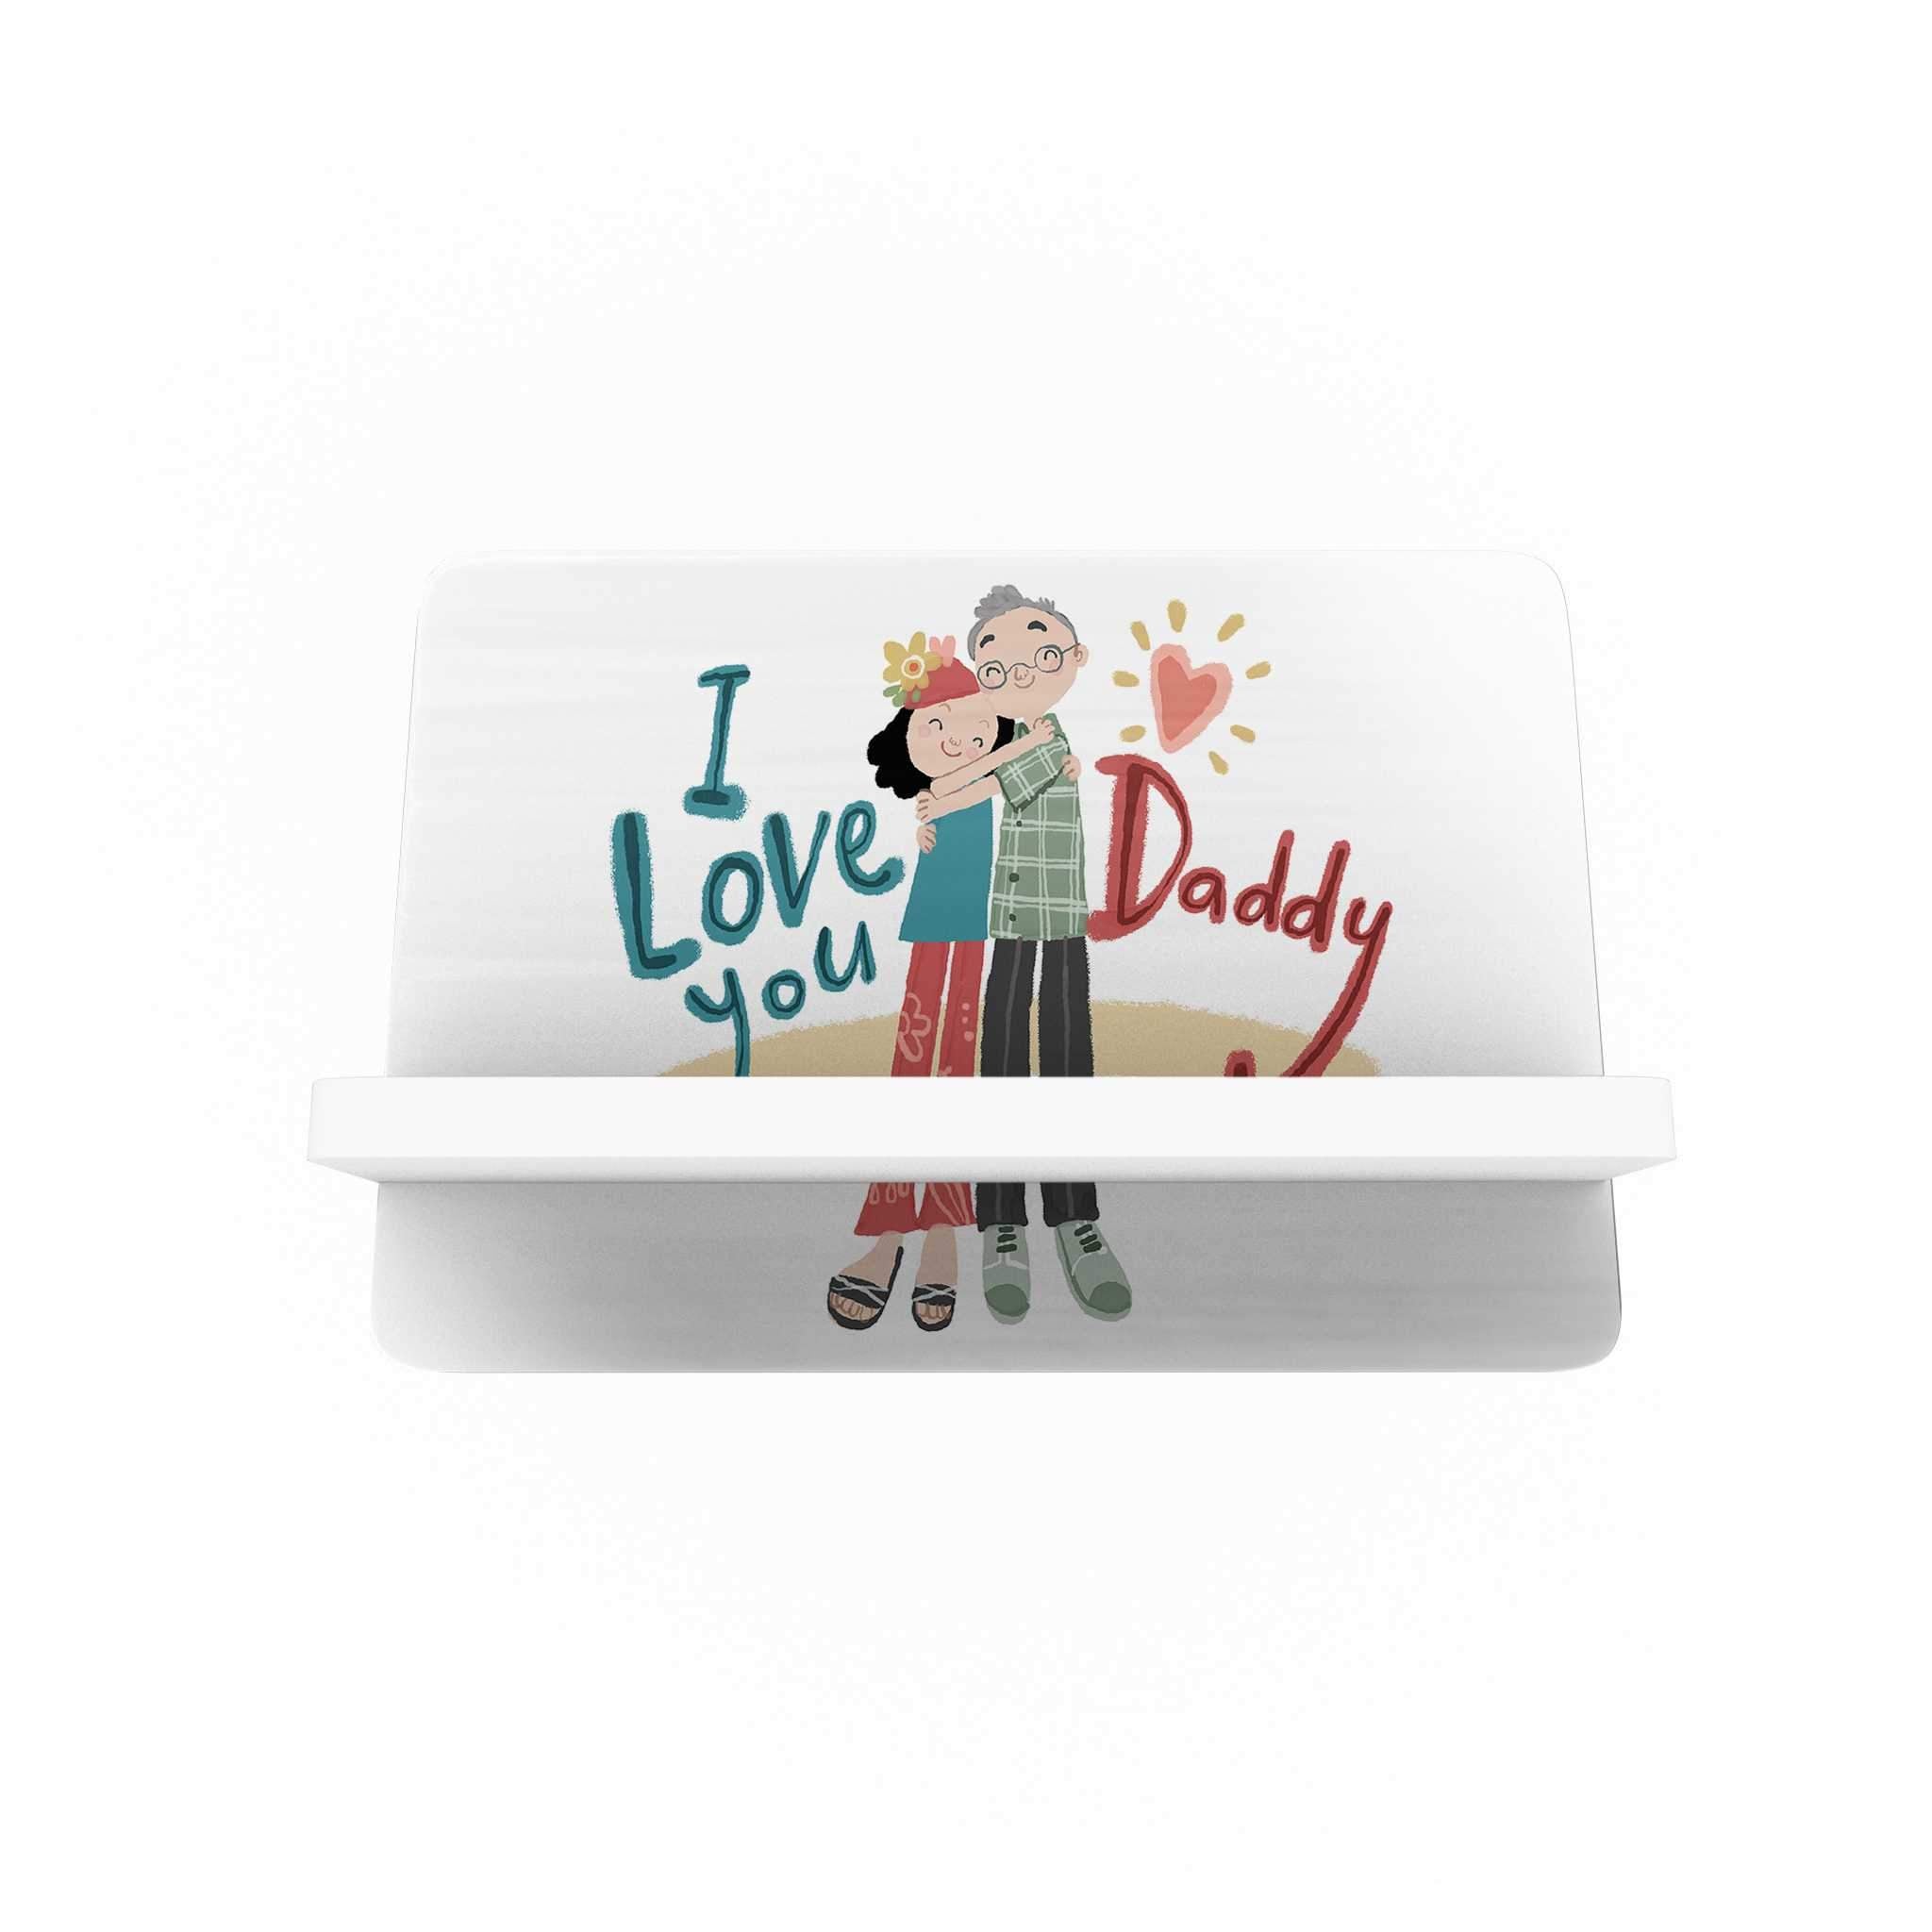 I Love You Daddy Cellphone Holder